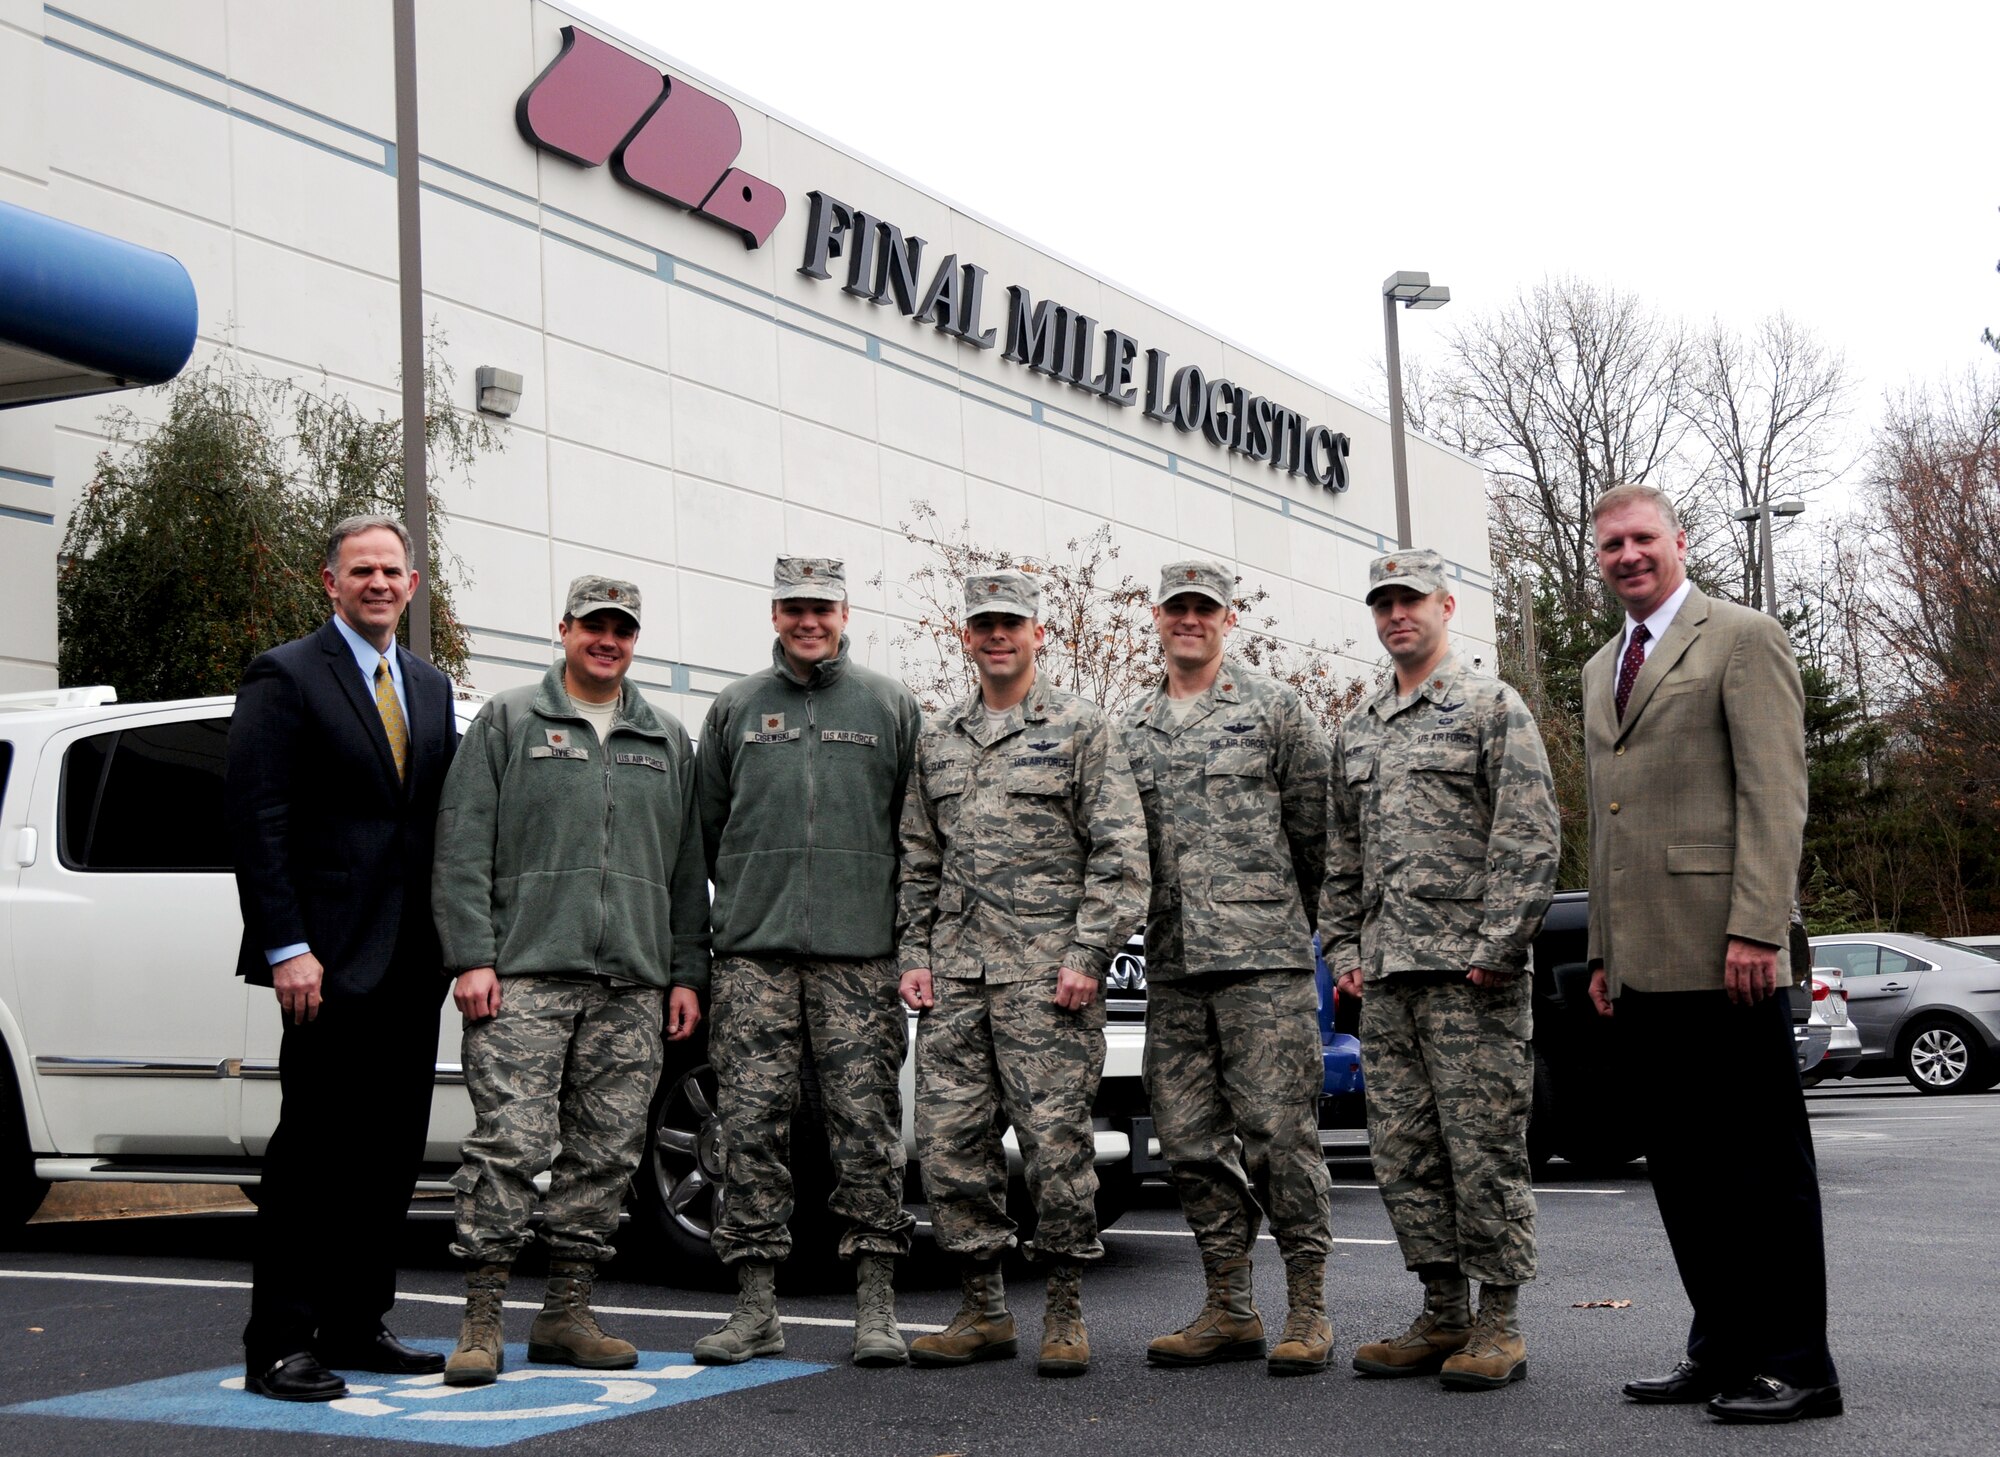 Majors from Air Mobility Command pose for a photo with Colice Powell and Mark Gordon, both Final Mile Logistics, at FML in Atlanta, Ga., Dec. 8, 2014. Five majors from AMC came to the Atlanta area the week of Dec. 8 through 10 to speak to civilian business leaders as part of the Joint Mobility Fellowship Program. (U.S. Air Force photo by Senior Airman Daniel Phelps)